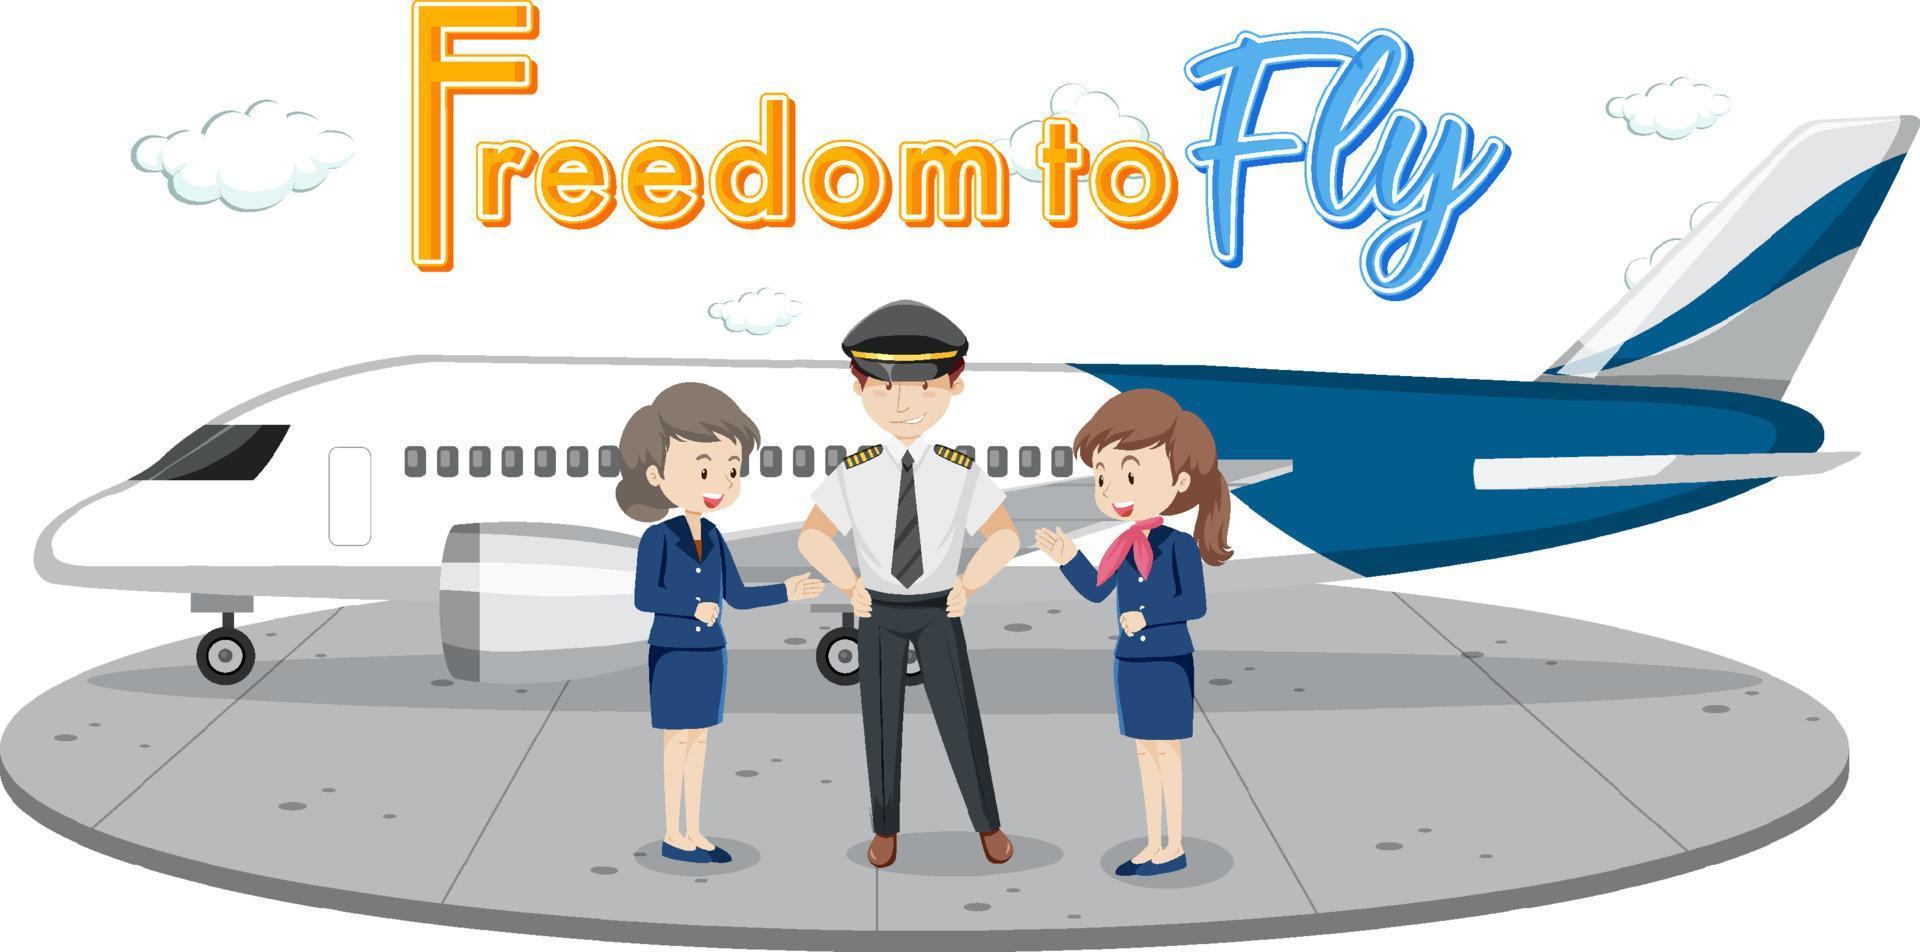 Freedom to fly typography design with aircrew characters vector